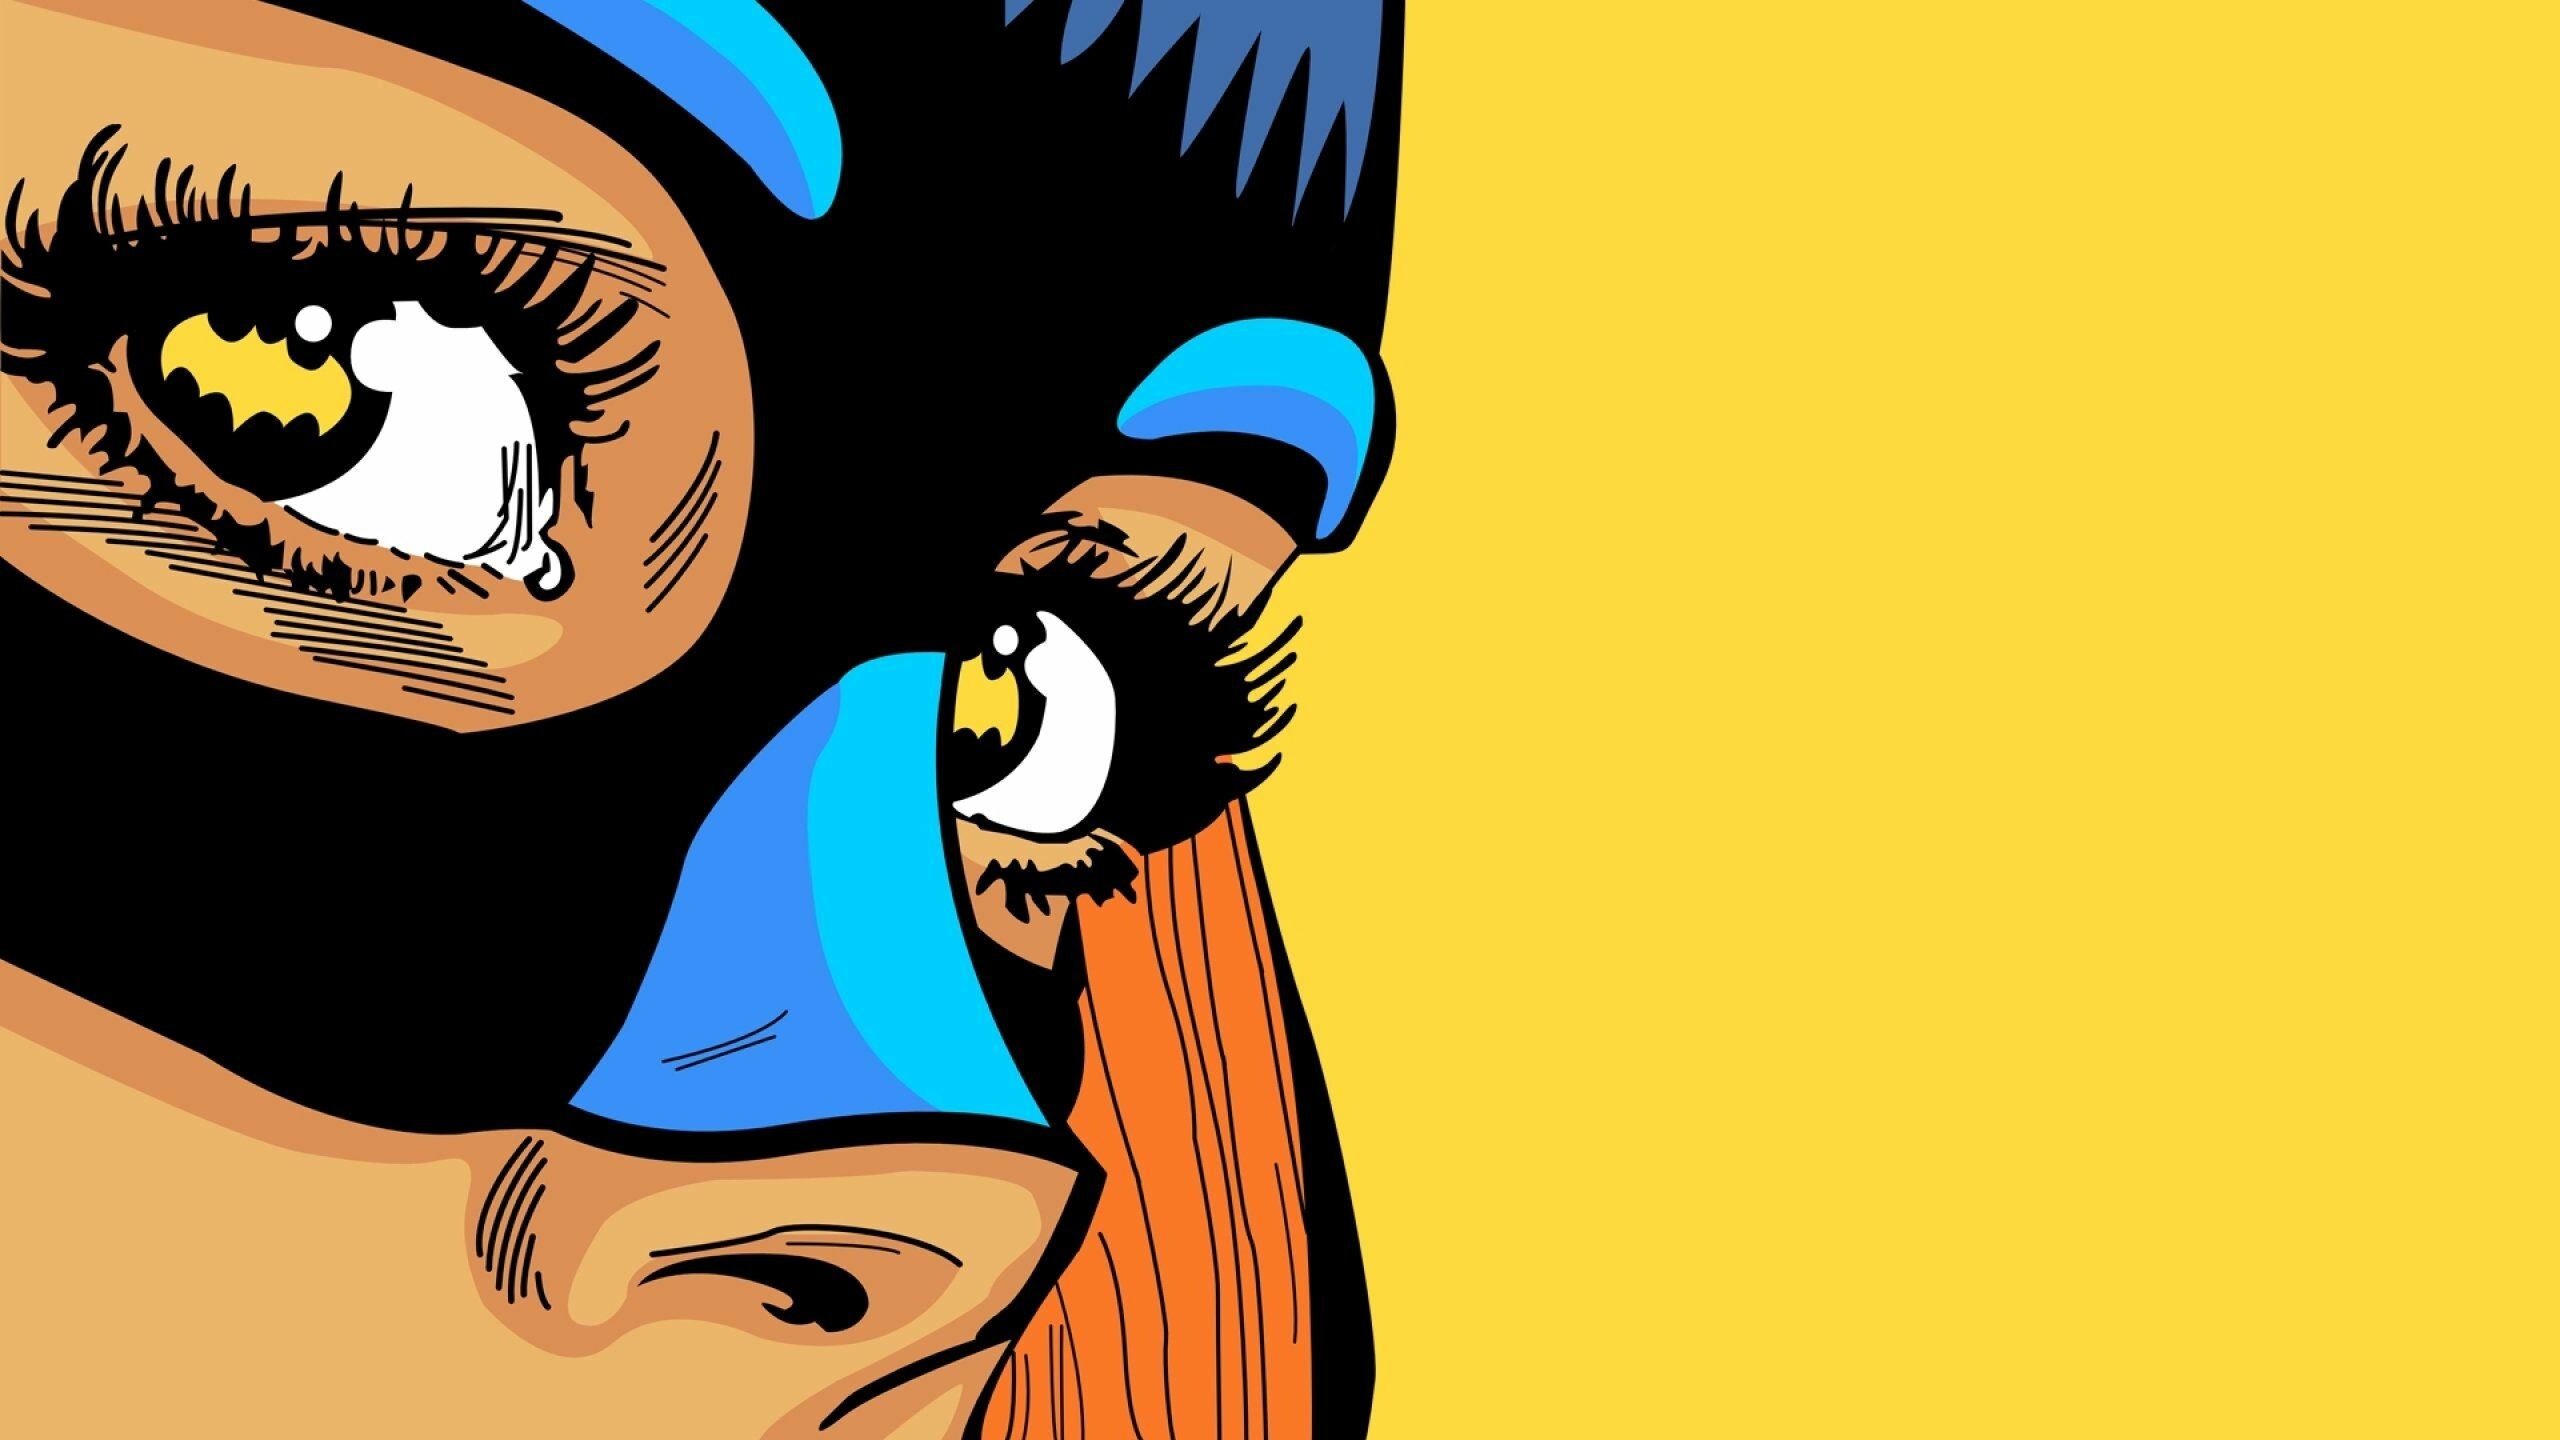 Pop Art: Imagery from everyday life and popular or mass culture, Retro, Cat Woman, Batman. 2560x1440 HD Wallpaper.